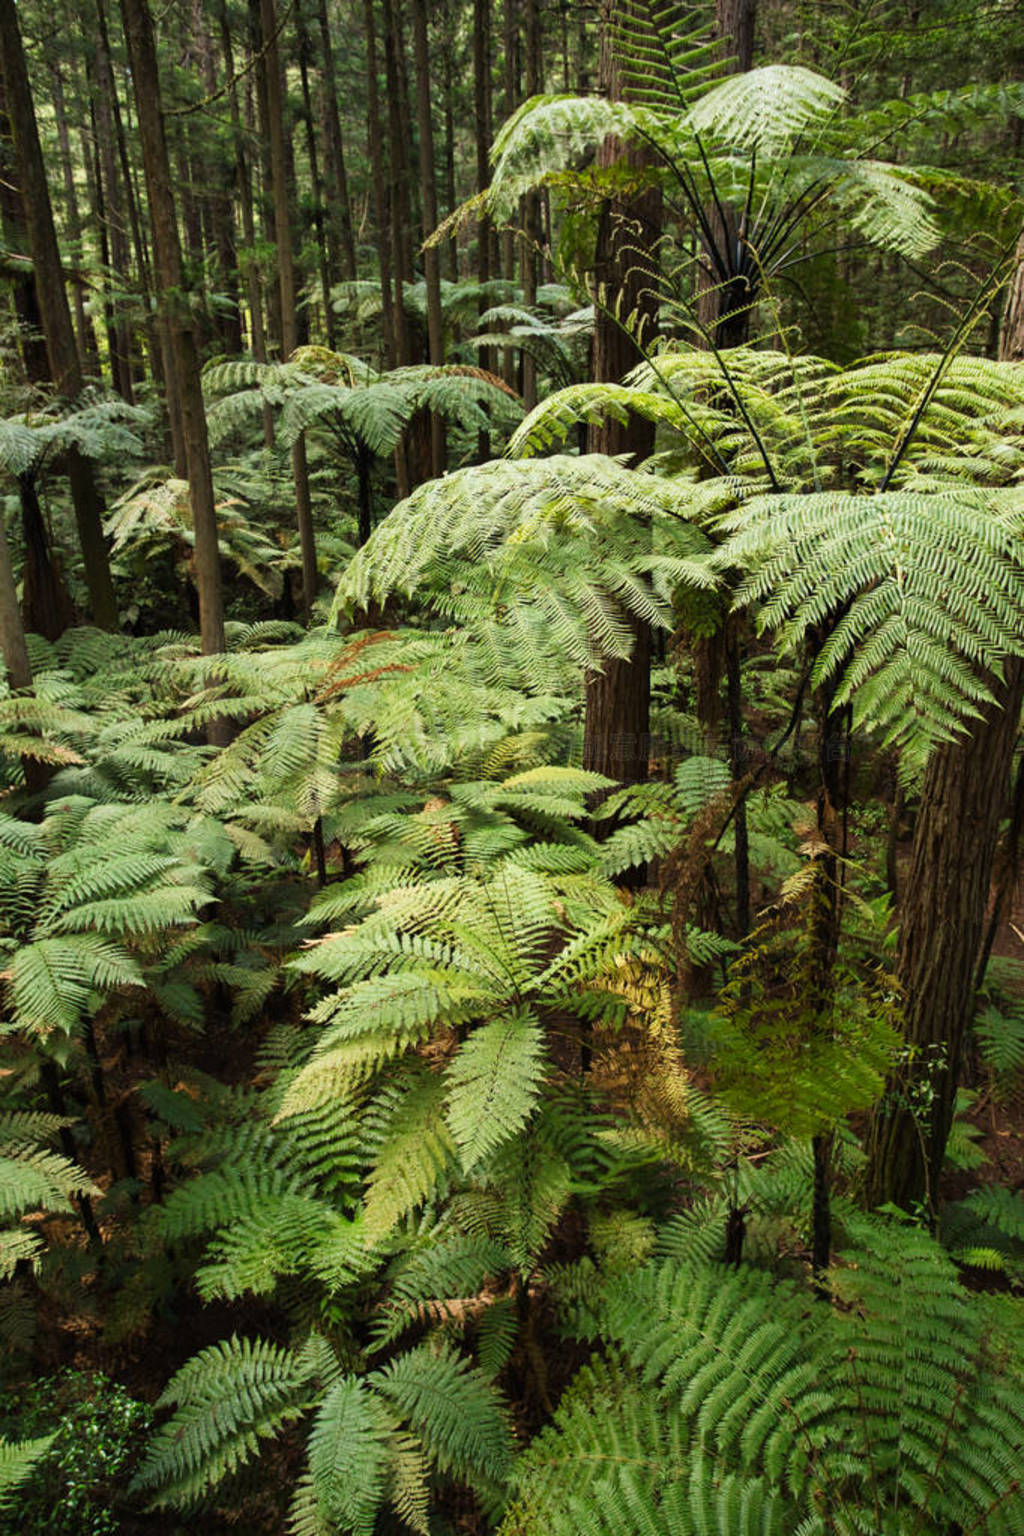 Forest of Tree Ferns and Giant Redwoods in Whakarewarewa Forest